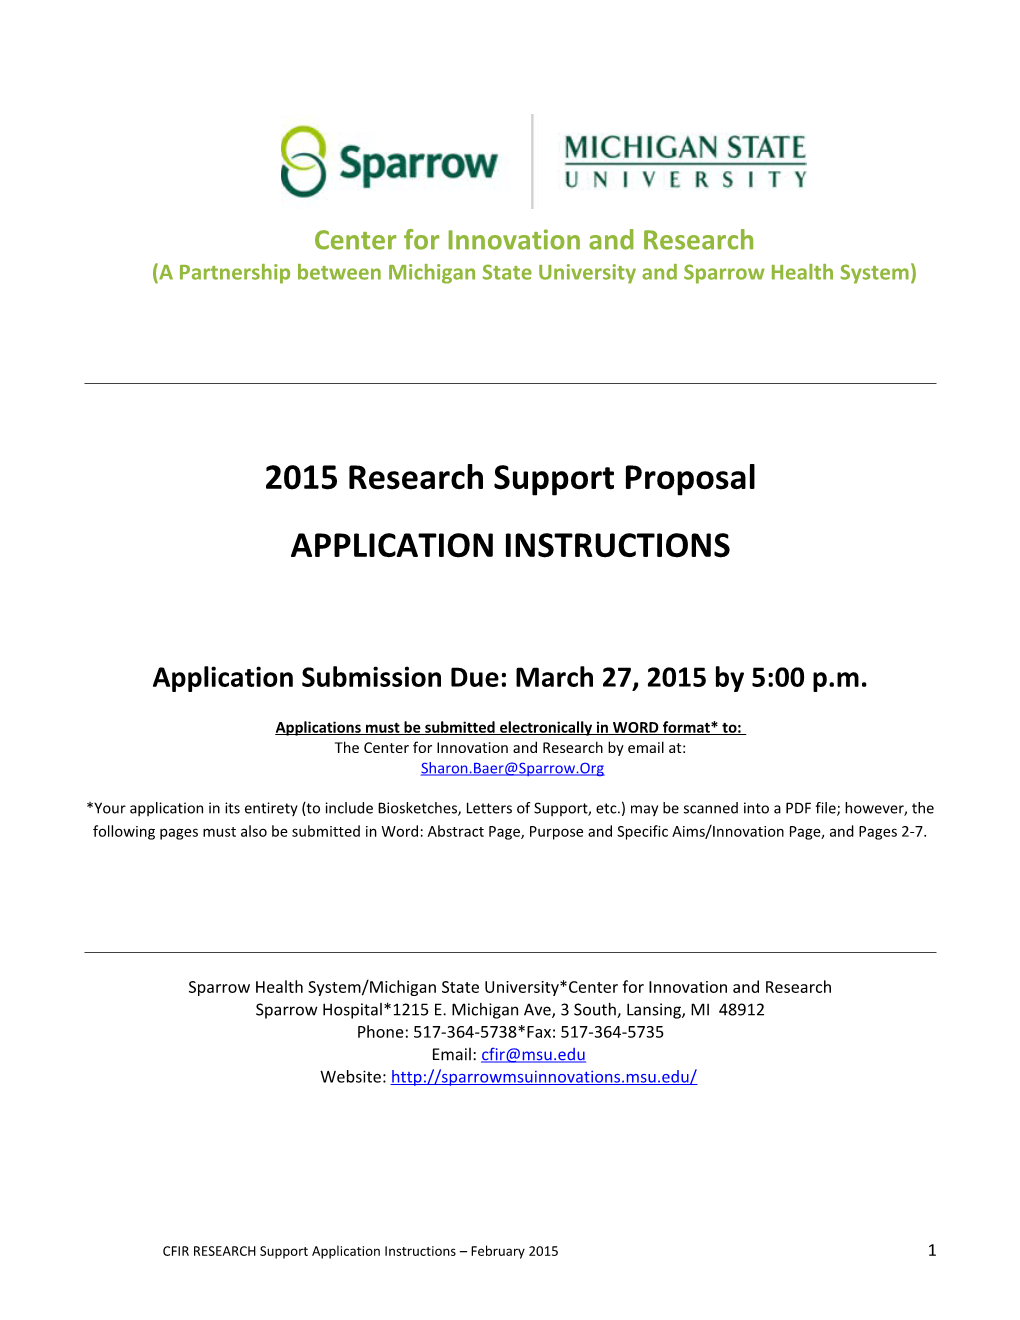 2015 Research Support Proposal